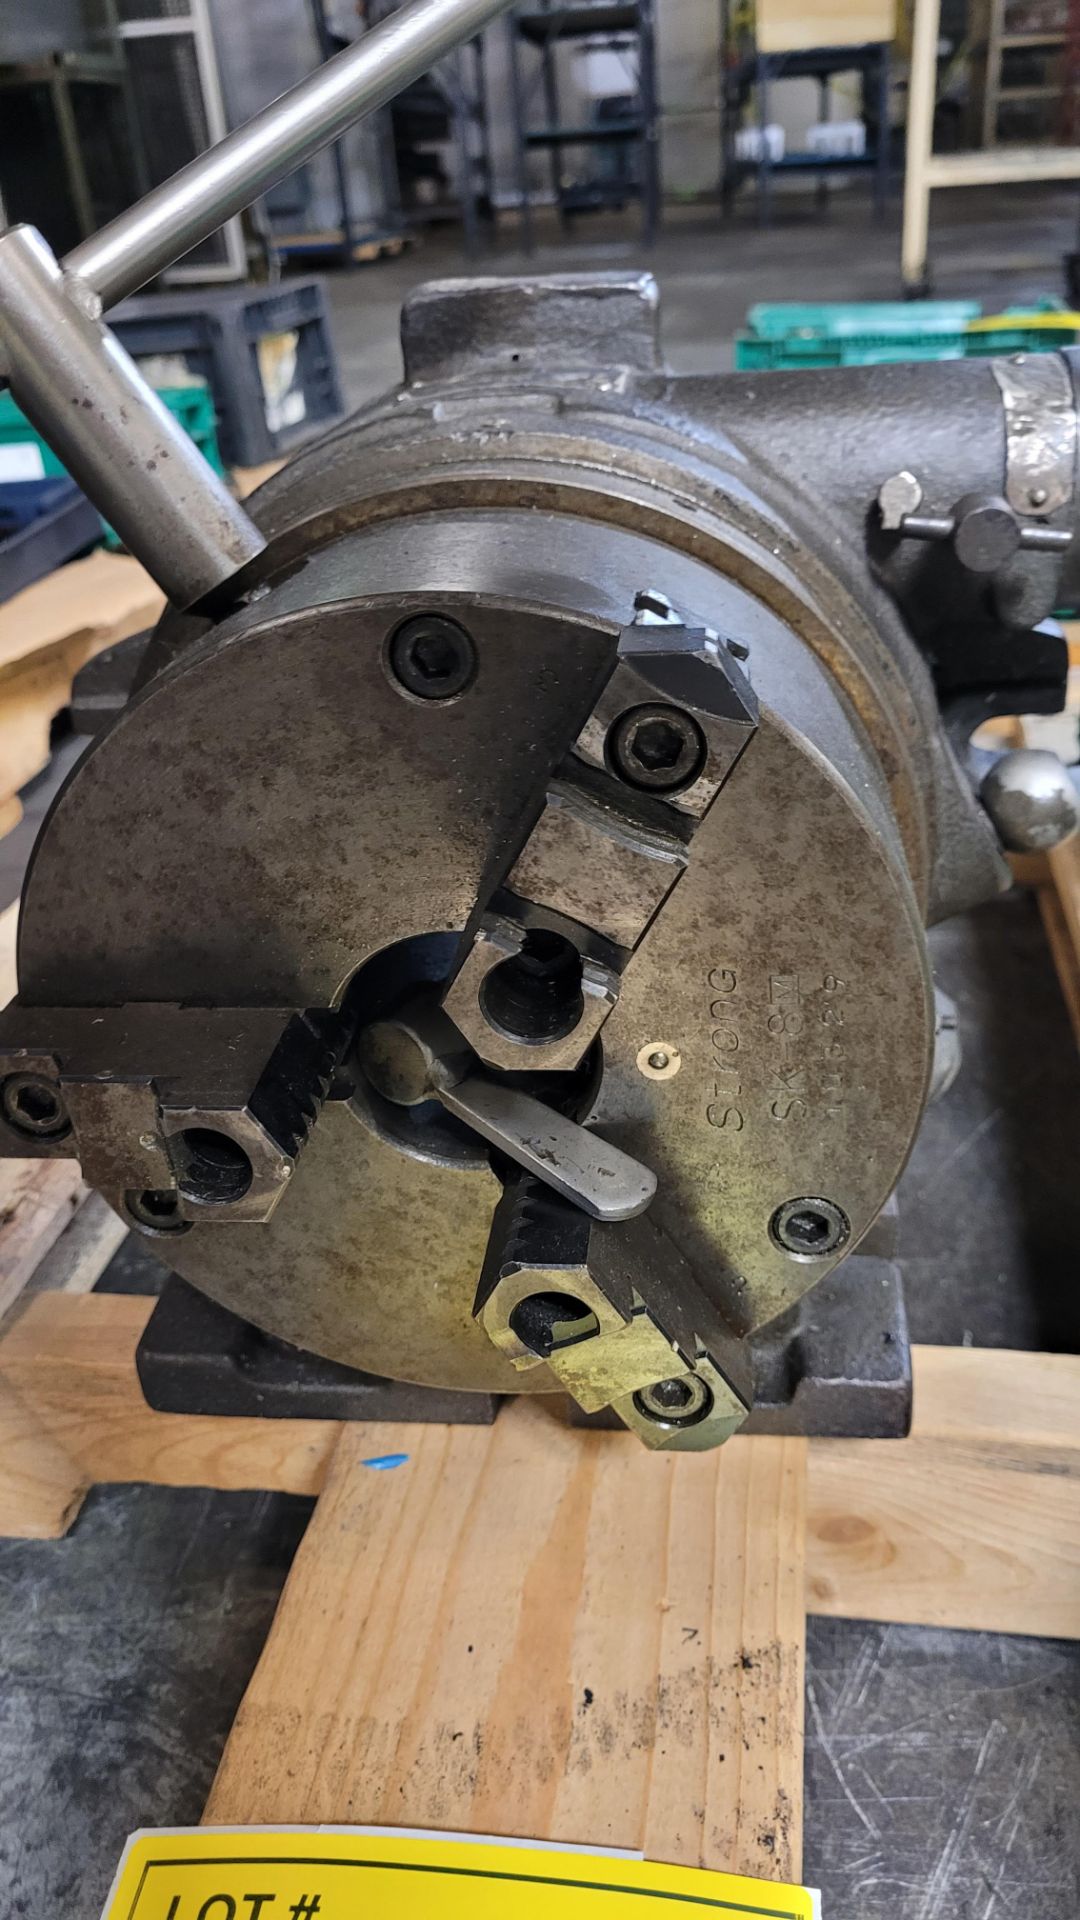 ROTARY TABLE W/ 3-JAW CHUCK, INDEXING FIXTURES, TAILSTOCKS, ETC. - Image 3 of 5